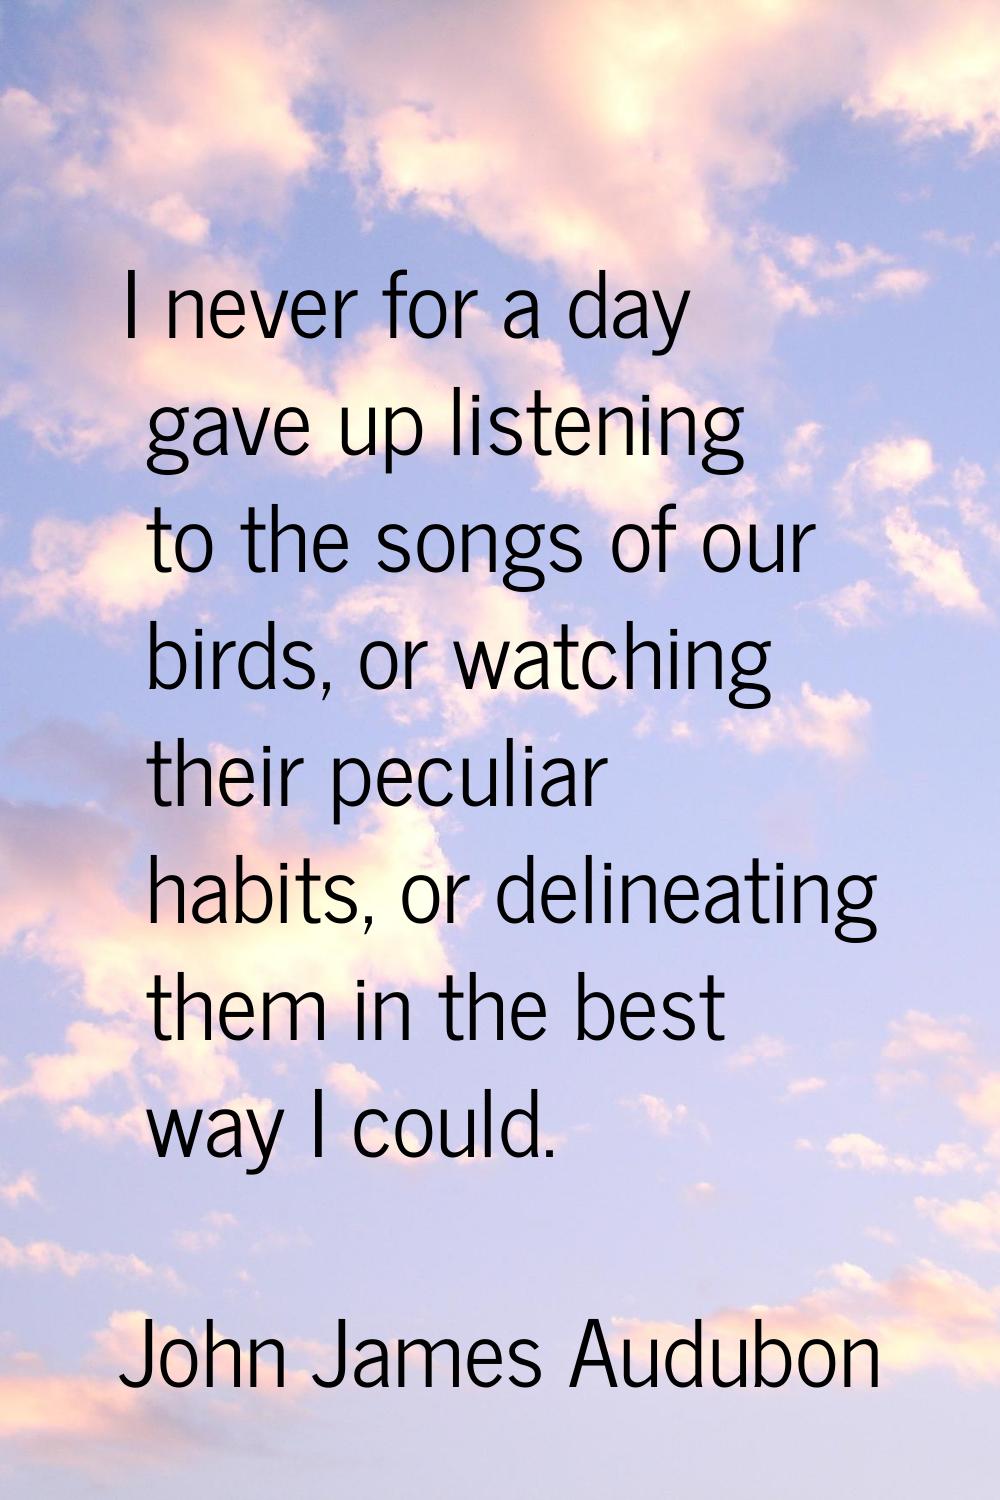 I never for a day gave up listening to the songs of our birds, or watching their peculiar habits, o